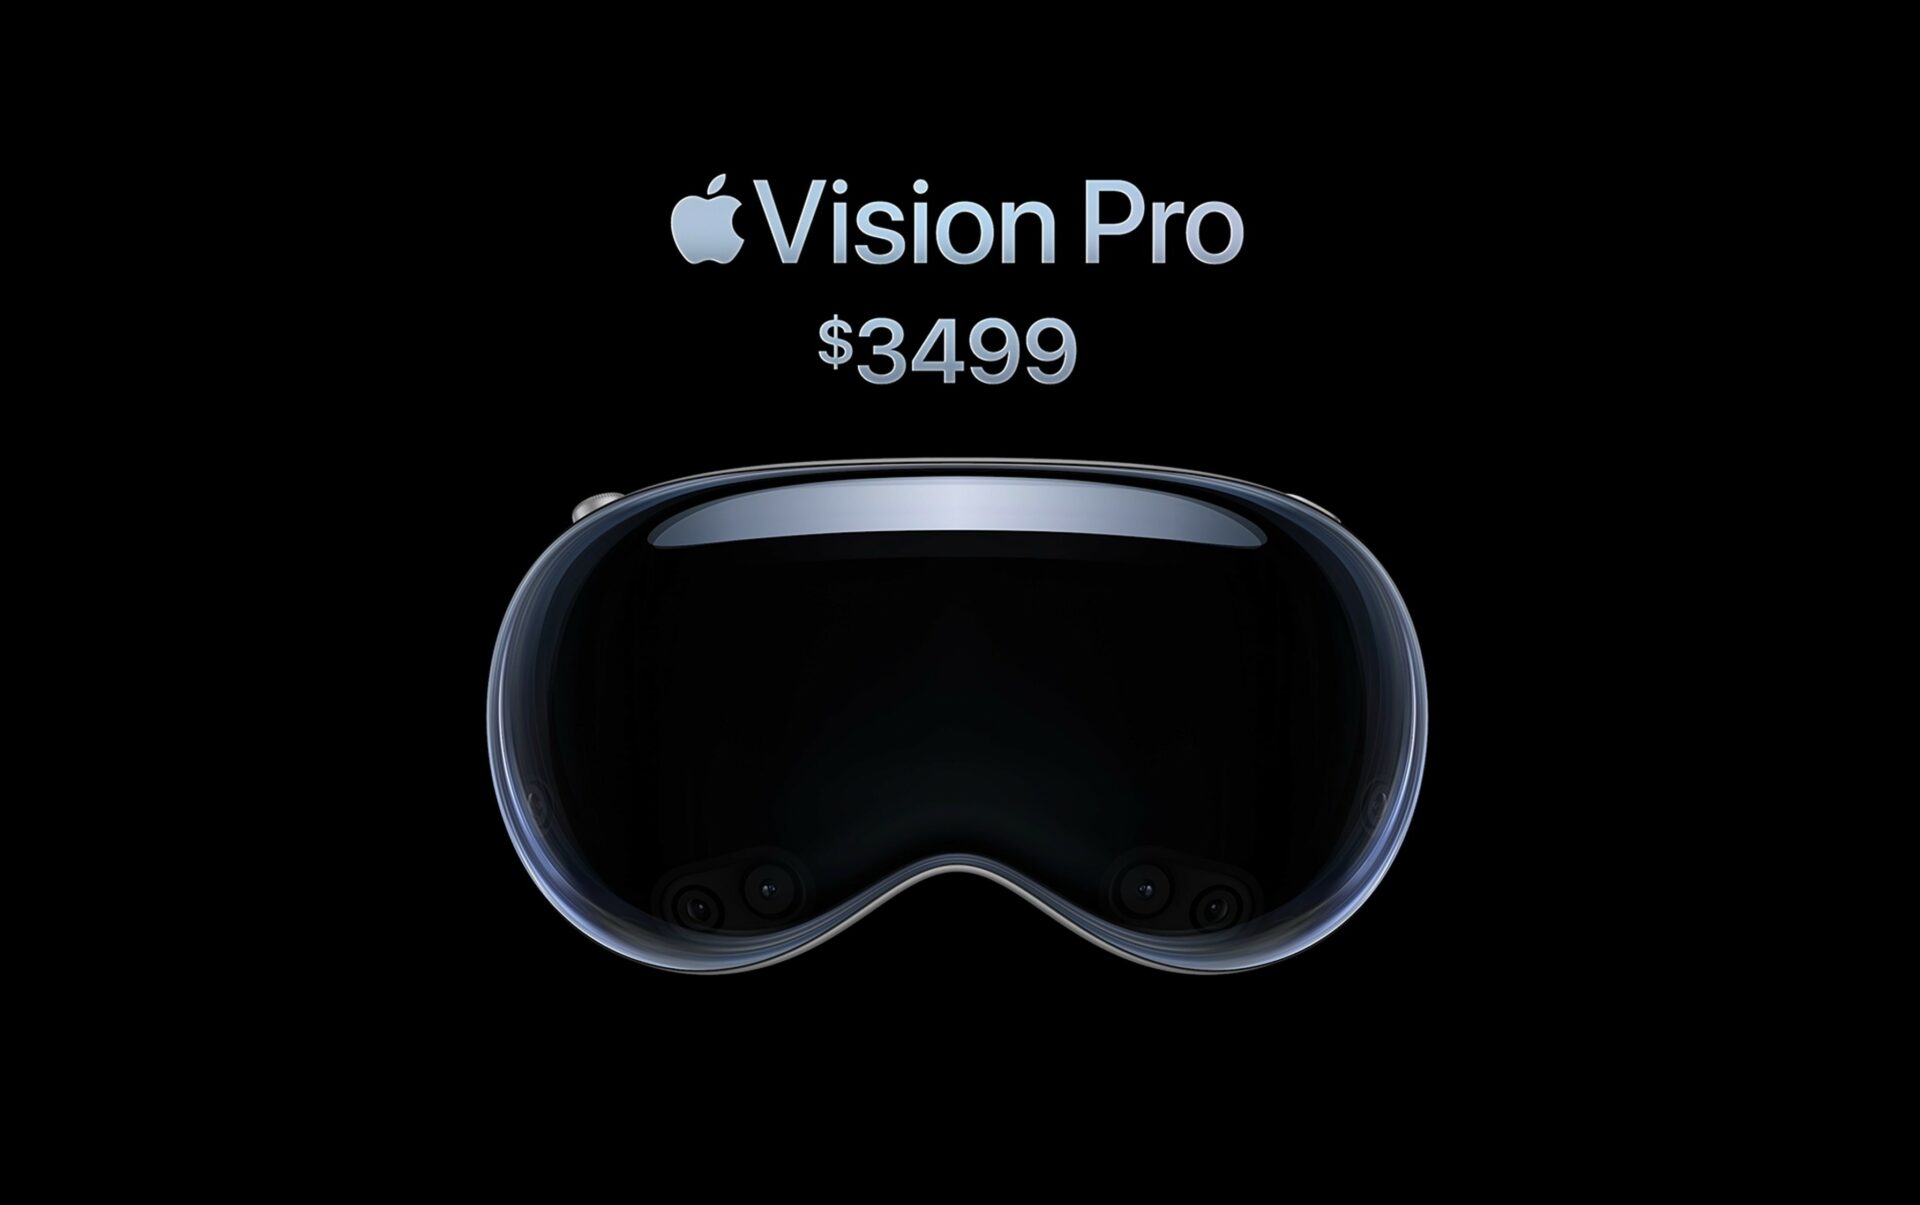 Apple Thinking About the Next Decade & Beyond with Vision Pro Announcement